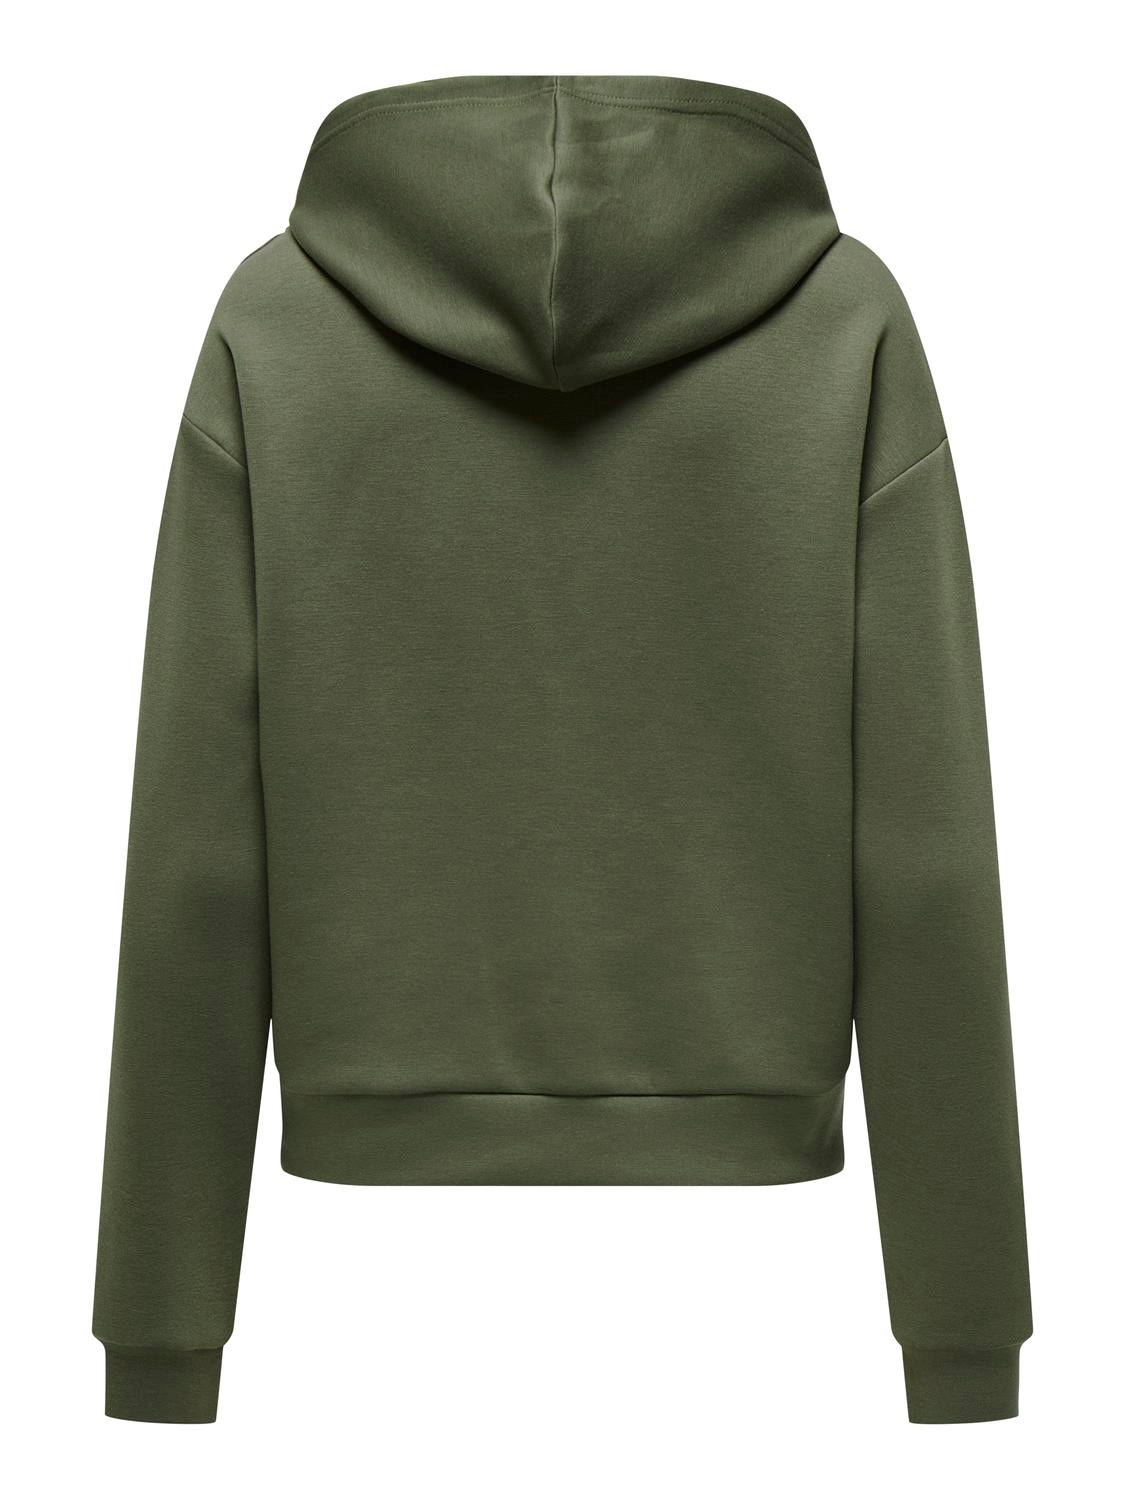 ONLY Training Hoodie -Dusty Olive - 15245850